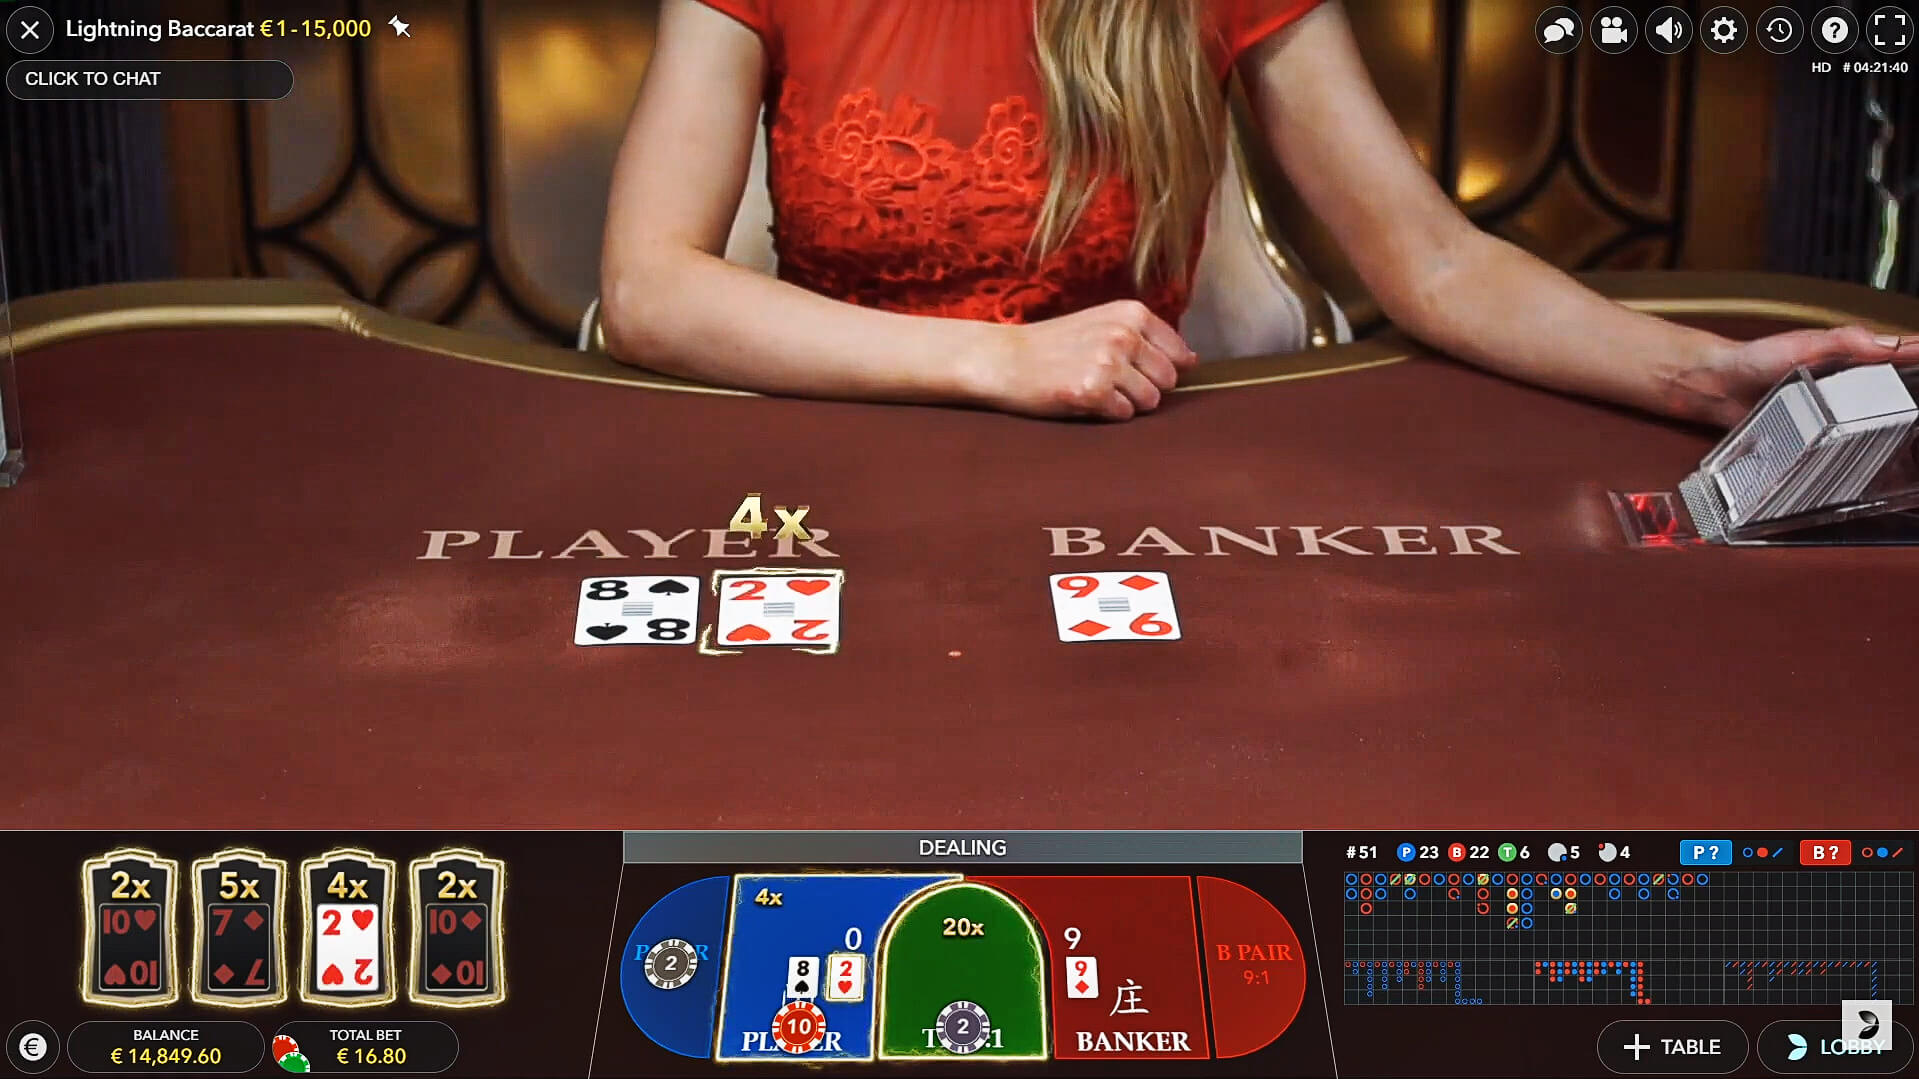 Live Dealer Baccarat in New Jersey